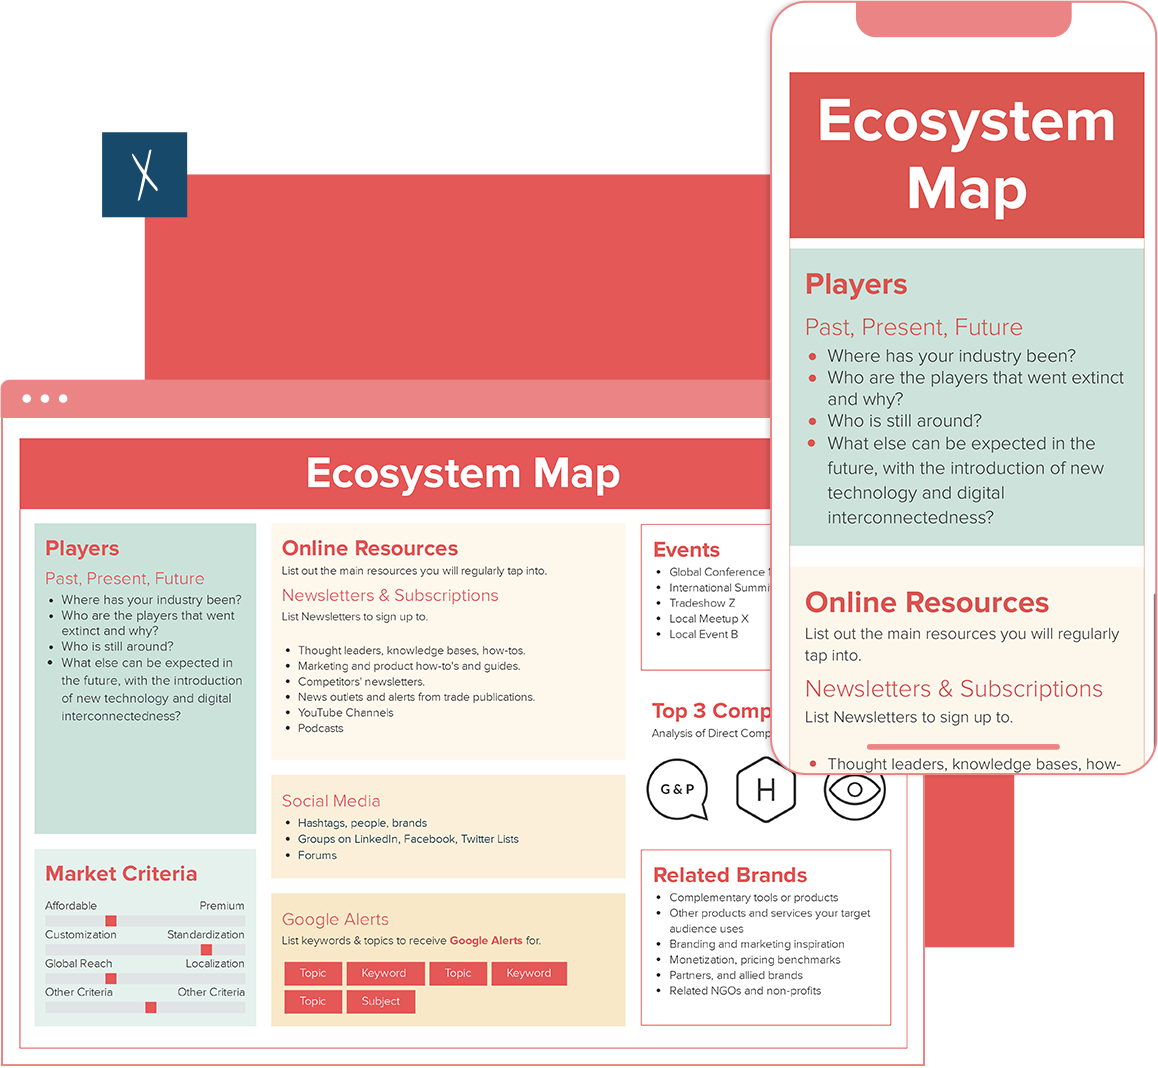 Ecosystem Map Template | Desktop And Mobile Views